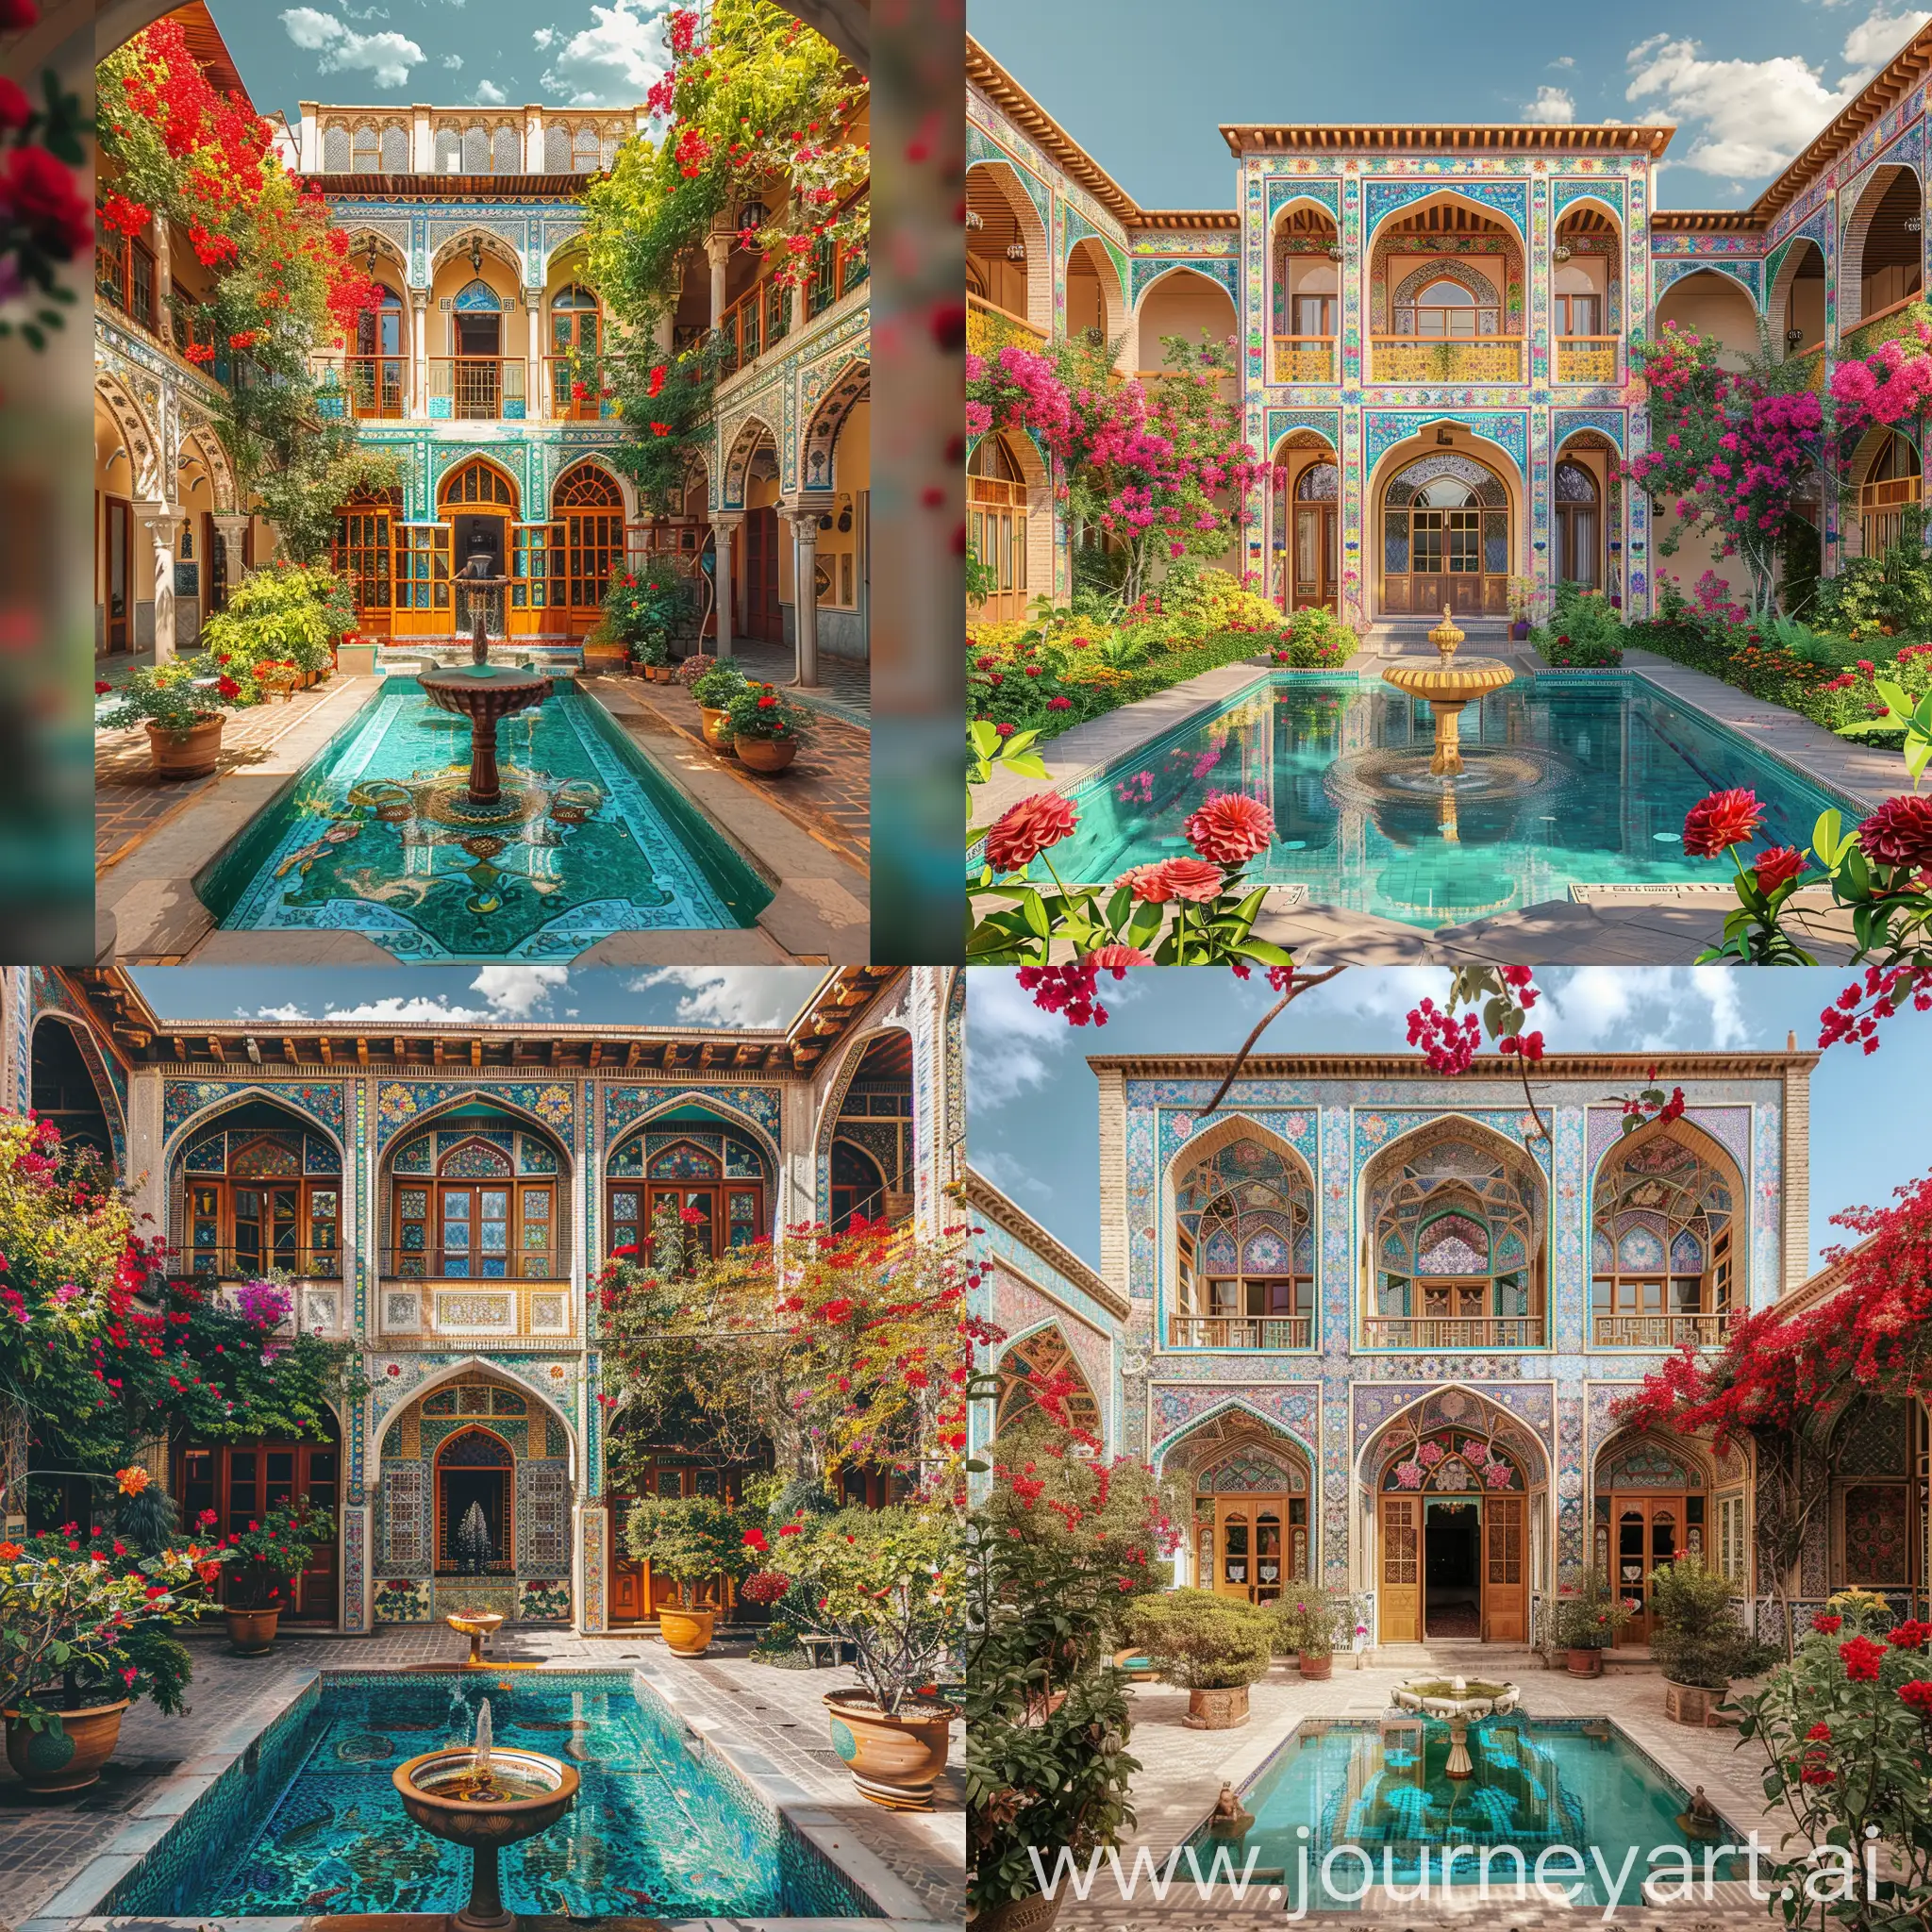 a traditional colorful persian house bulding with central yard and hanged bushes and red flowers and central pool and fauntain